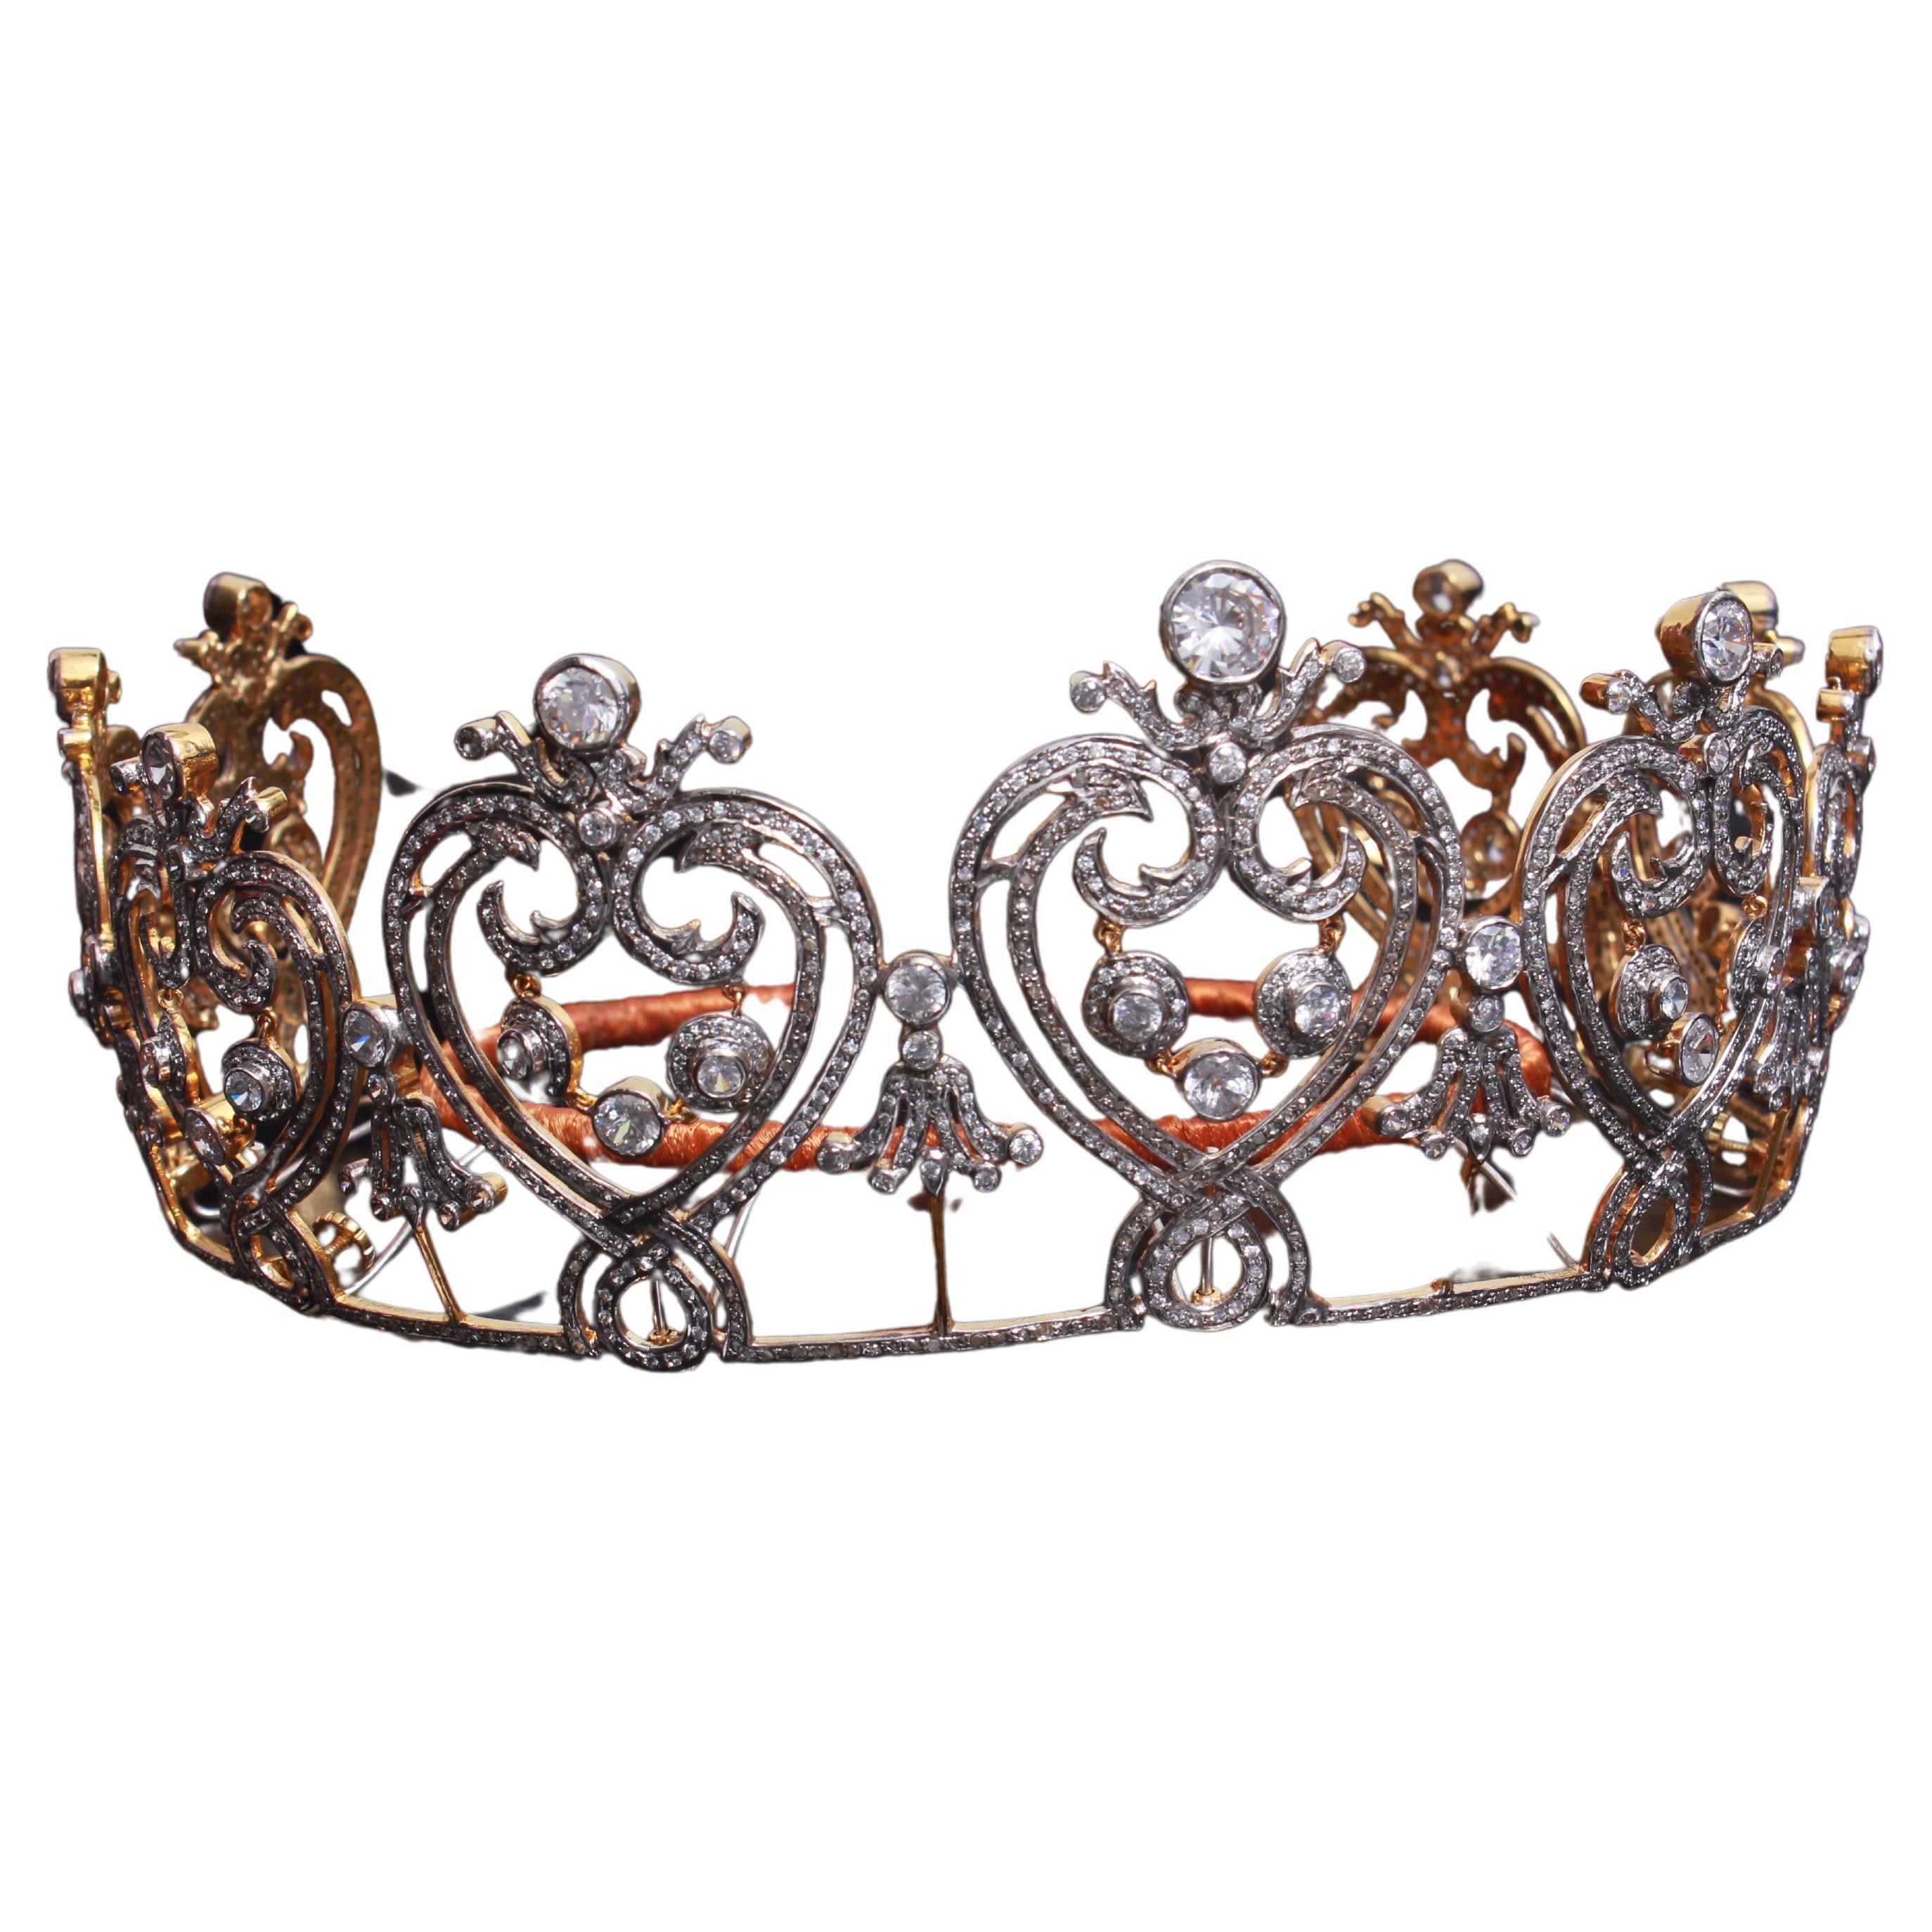 Royal Natural pave diamonds topaz sterling silver tiara head accessory band For Sale